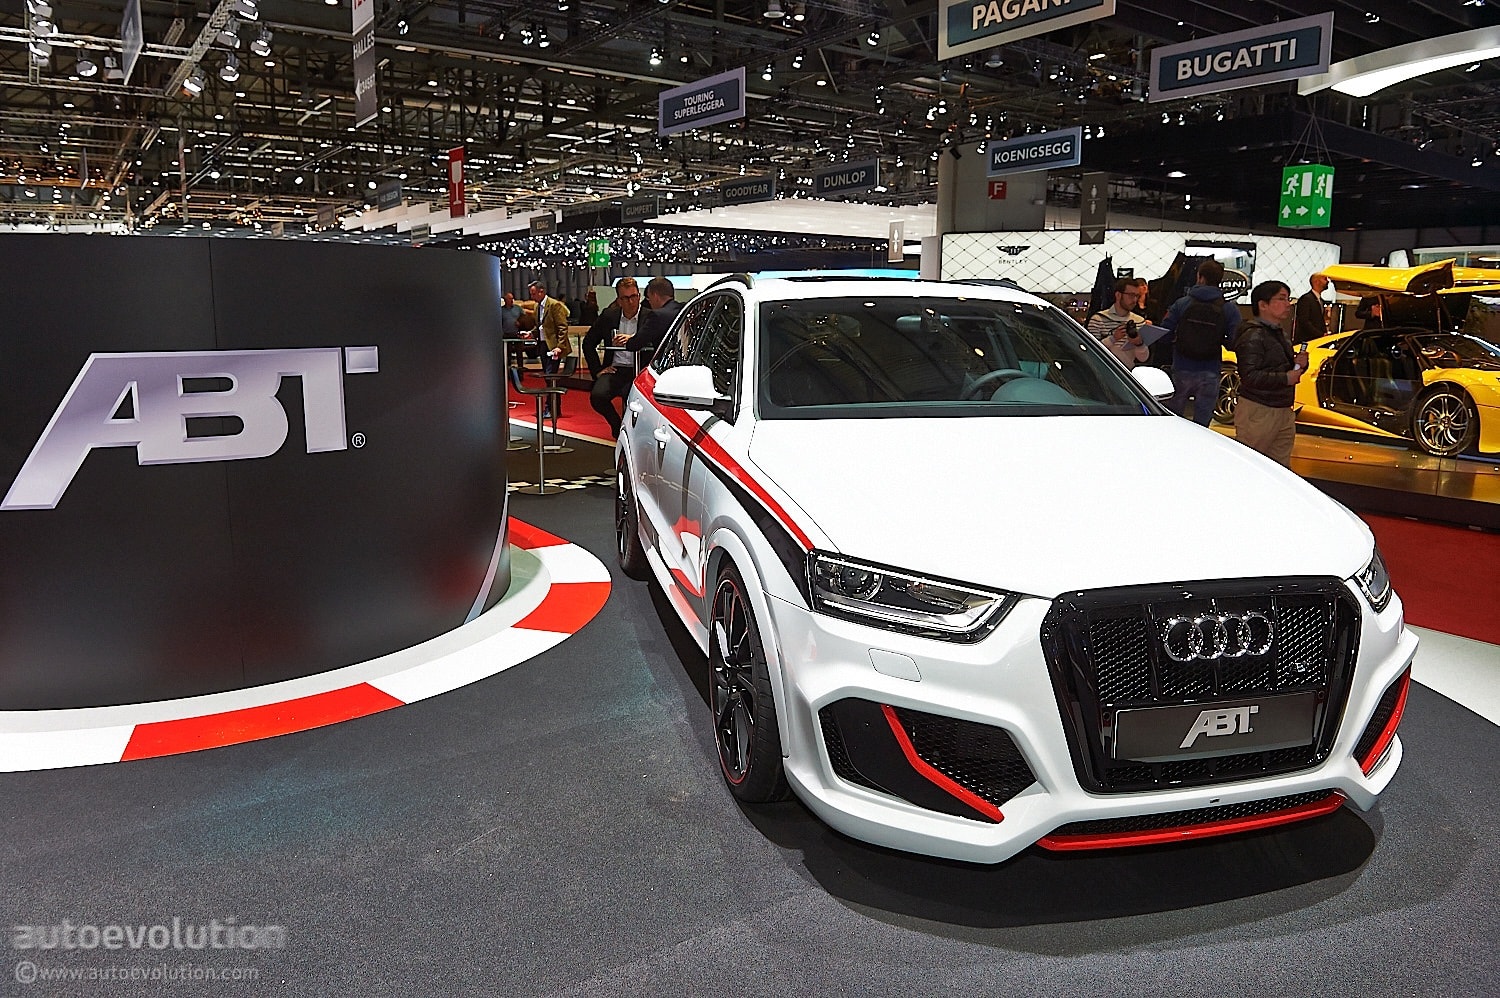 ABT Puts Power Back into 2.5 TFSI with Audi RS Q3 Tuning Project